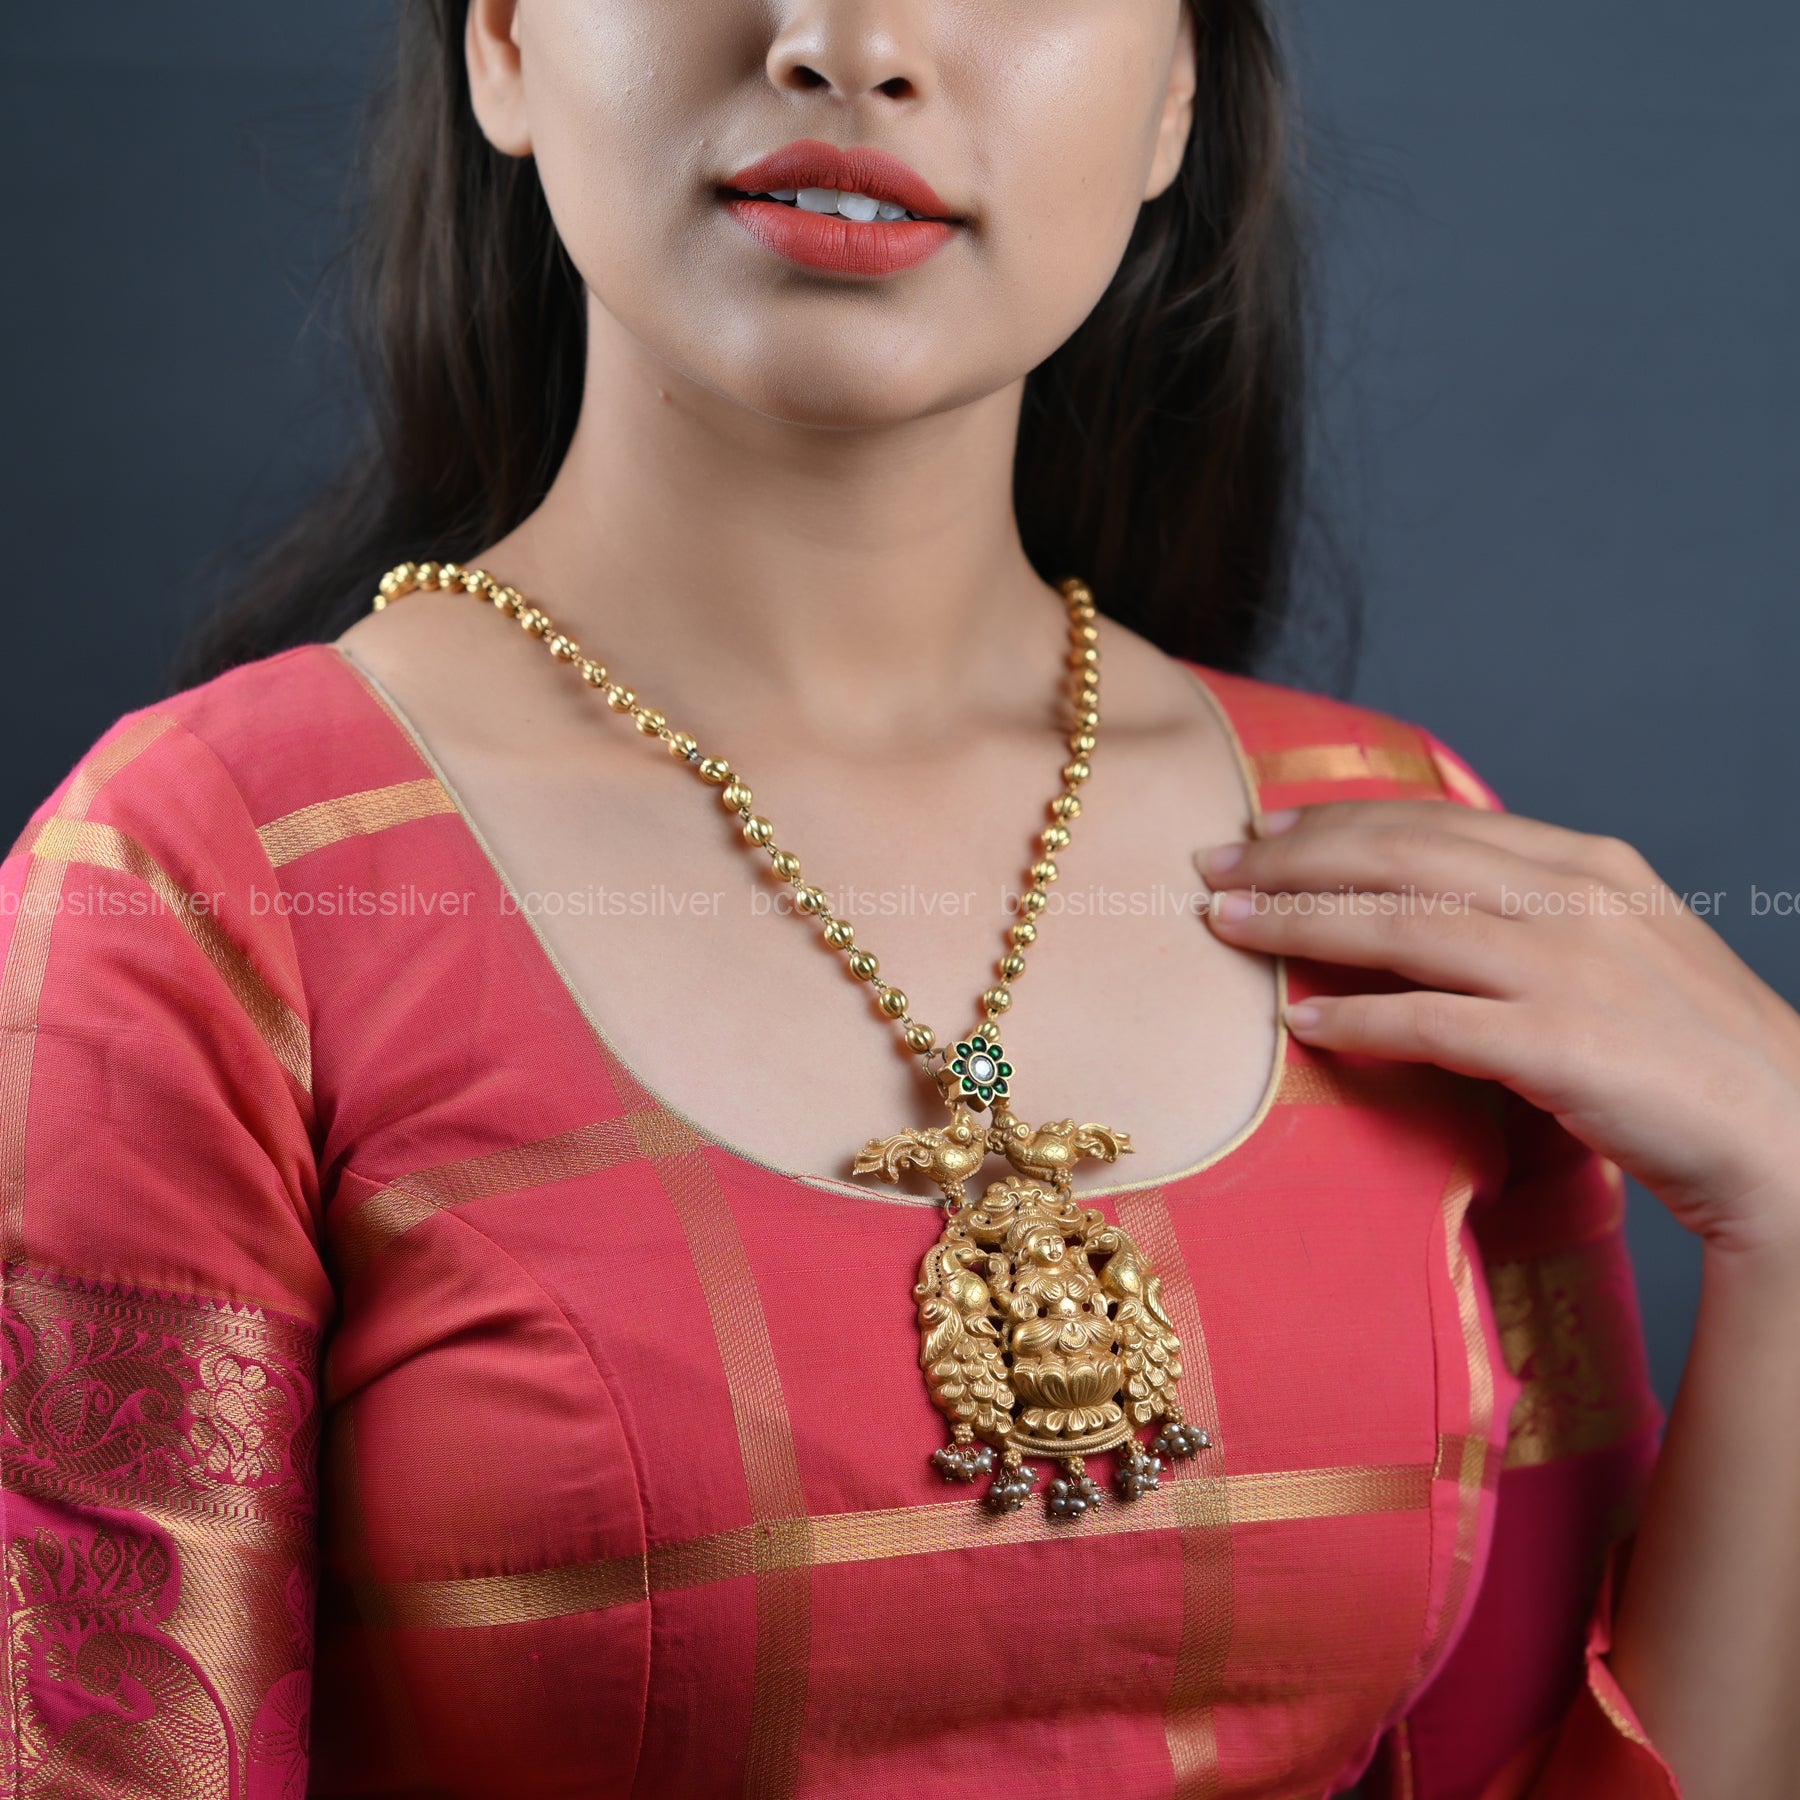 Gold Plated Chain with Lakshmi Pendant - 7027